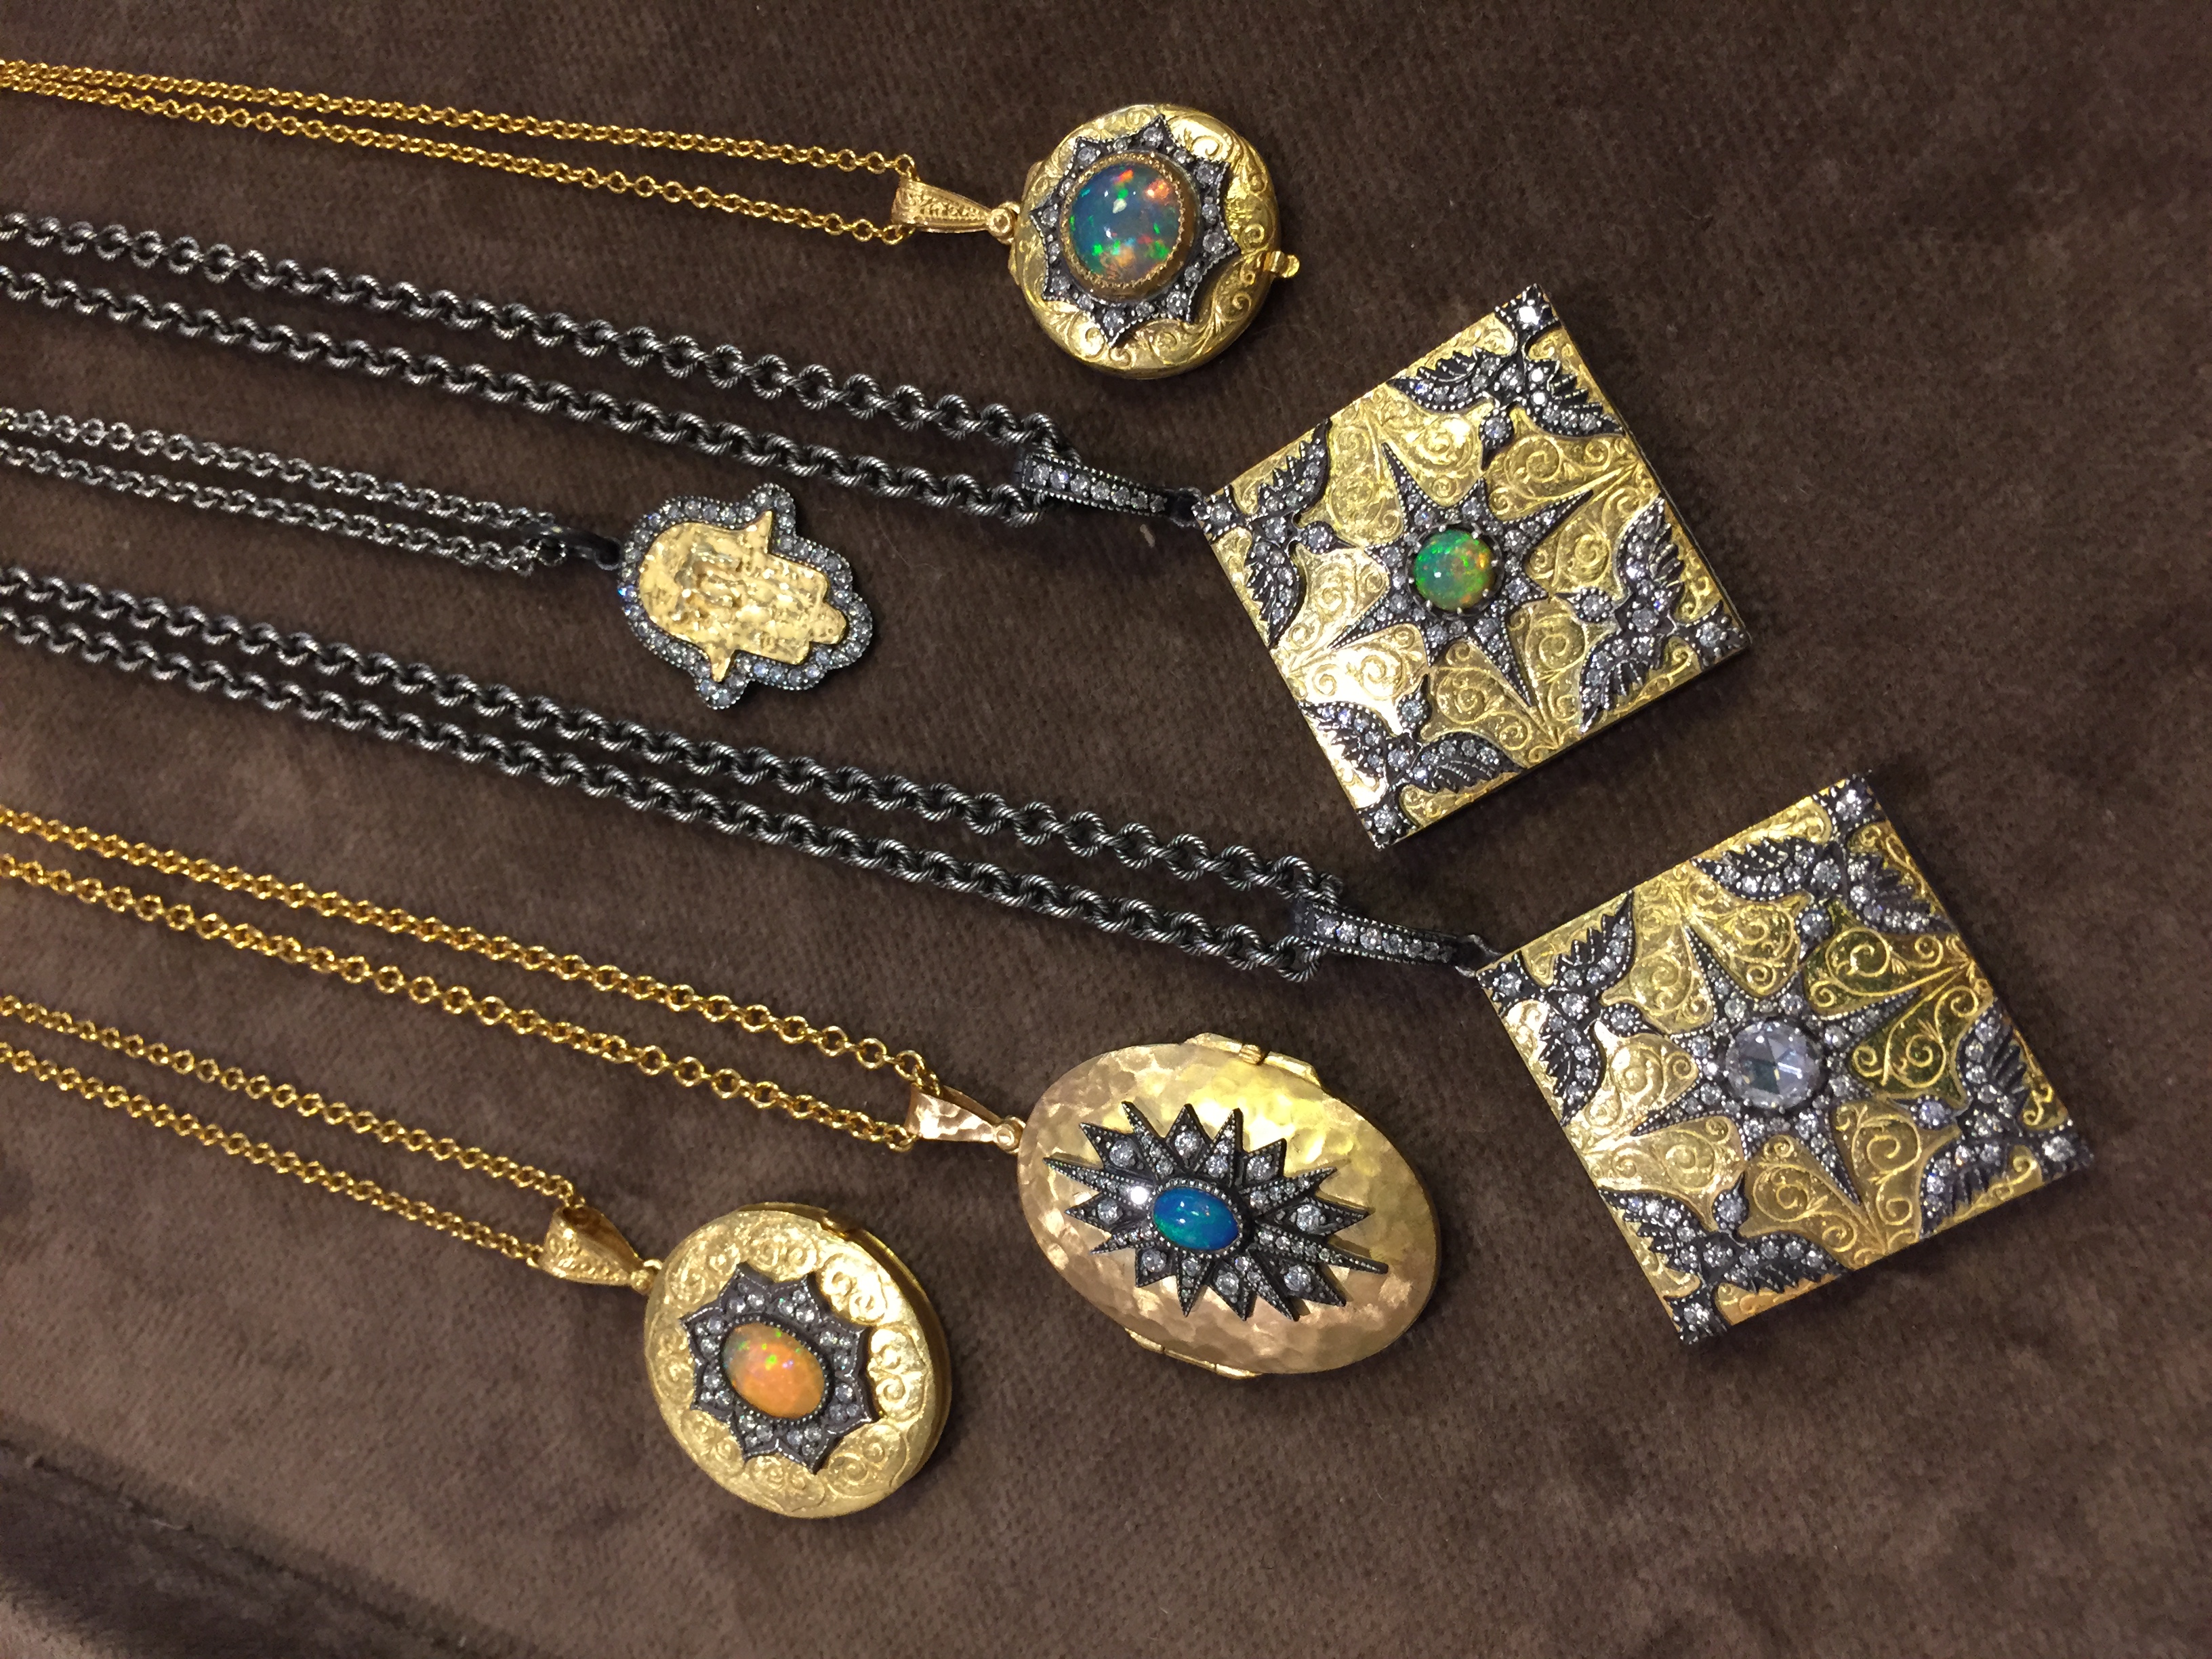  A selection of exceptional hand-carved 22k gold and silver lockets and pendants with gemstone and diamond accents, available at  Art &amp; Soul , Boulder, CO.&nbsp; 